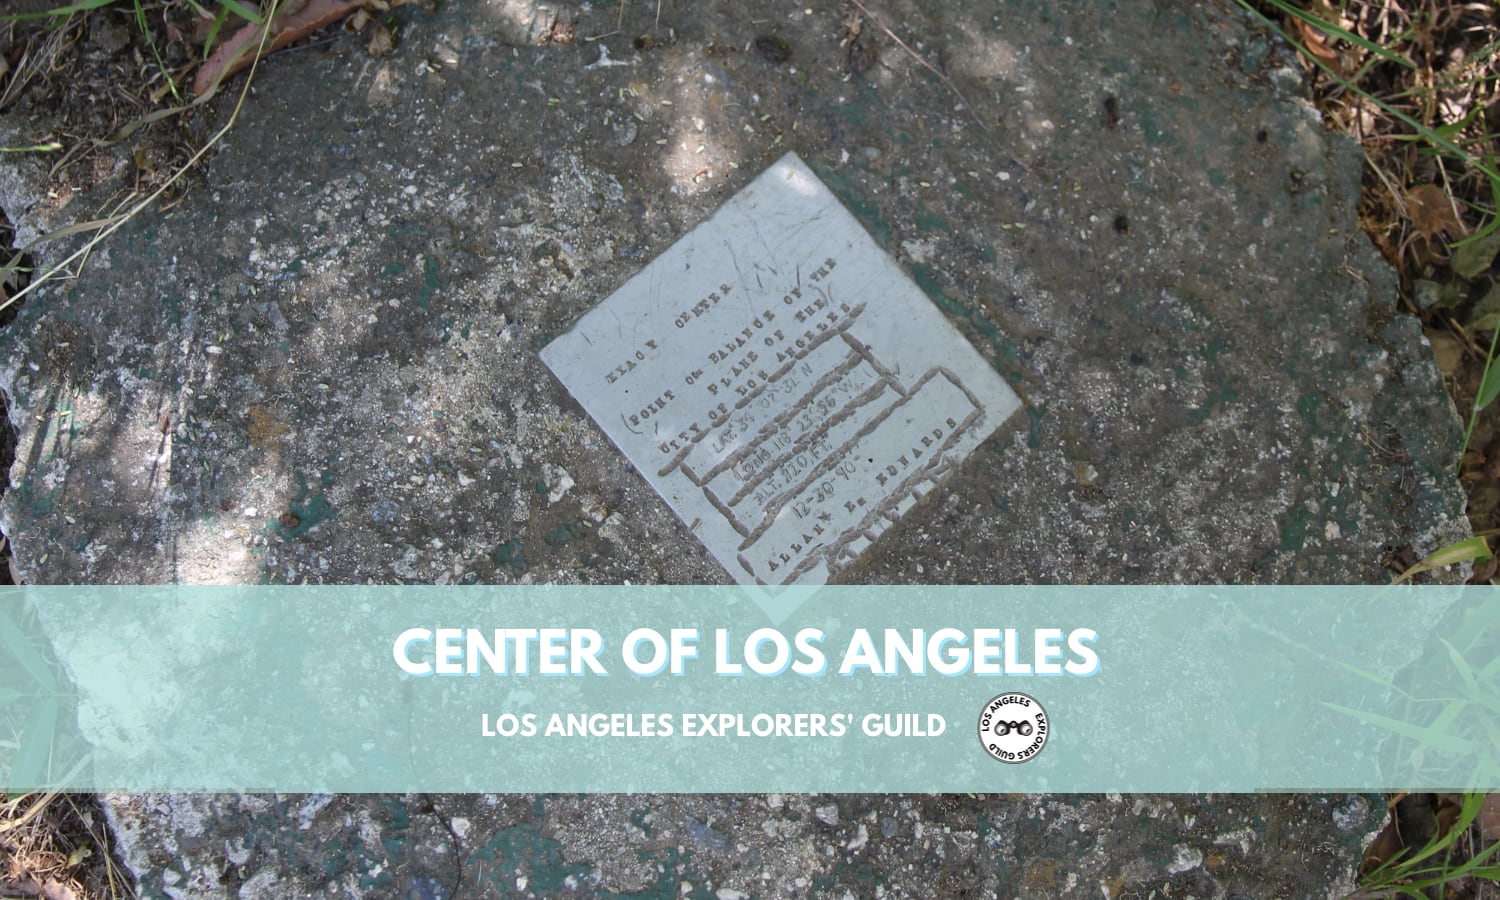 Edwards's Point, the geographic center of Los Angeles. Los Angeles Explorers' Guild.